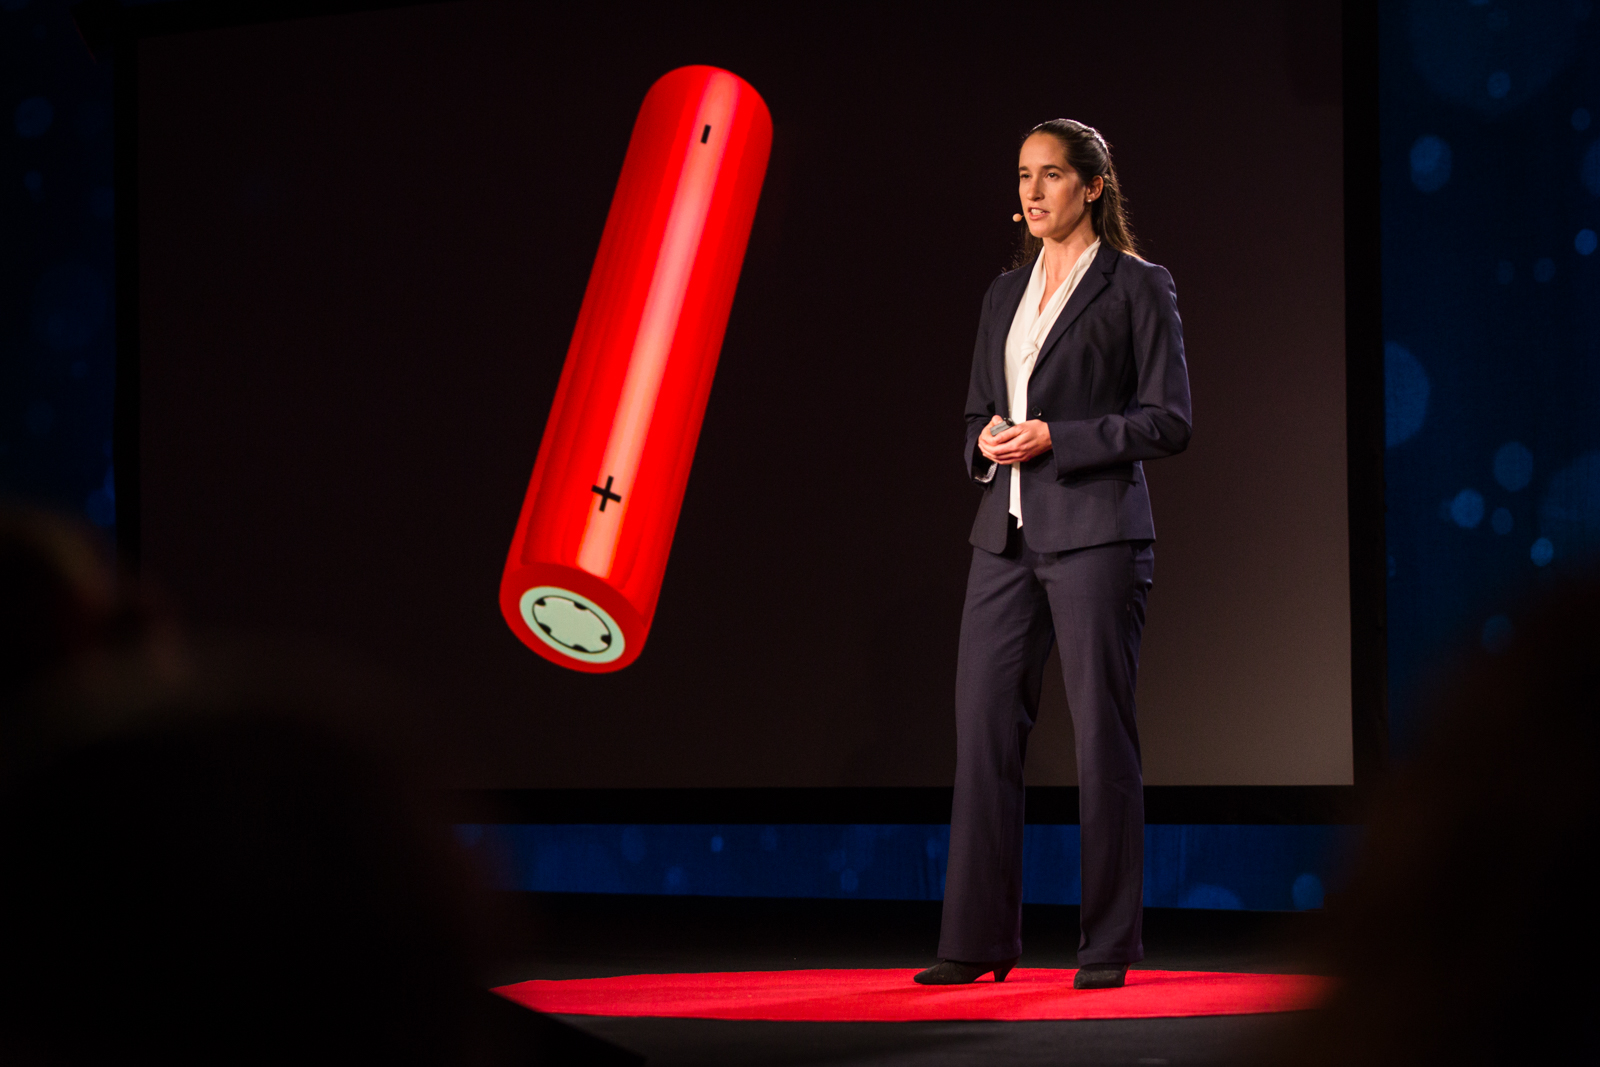 Vanessa Wood is helping designers build better batteries, by understanding how we recharge. She spoke onstage at the TED Fellows session of TED2016, February 15-19, 2016. Photo: Ryan Lash / TED